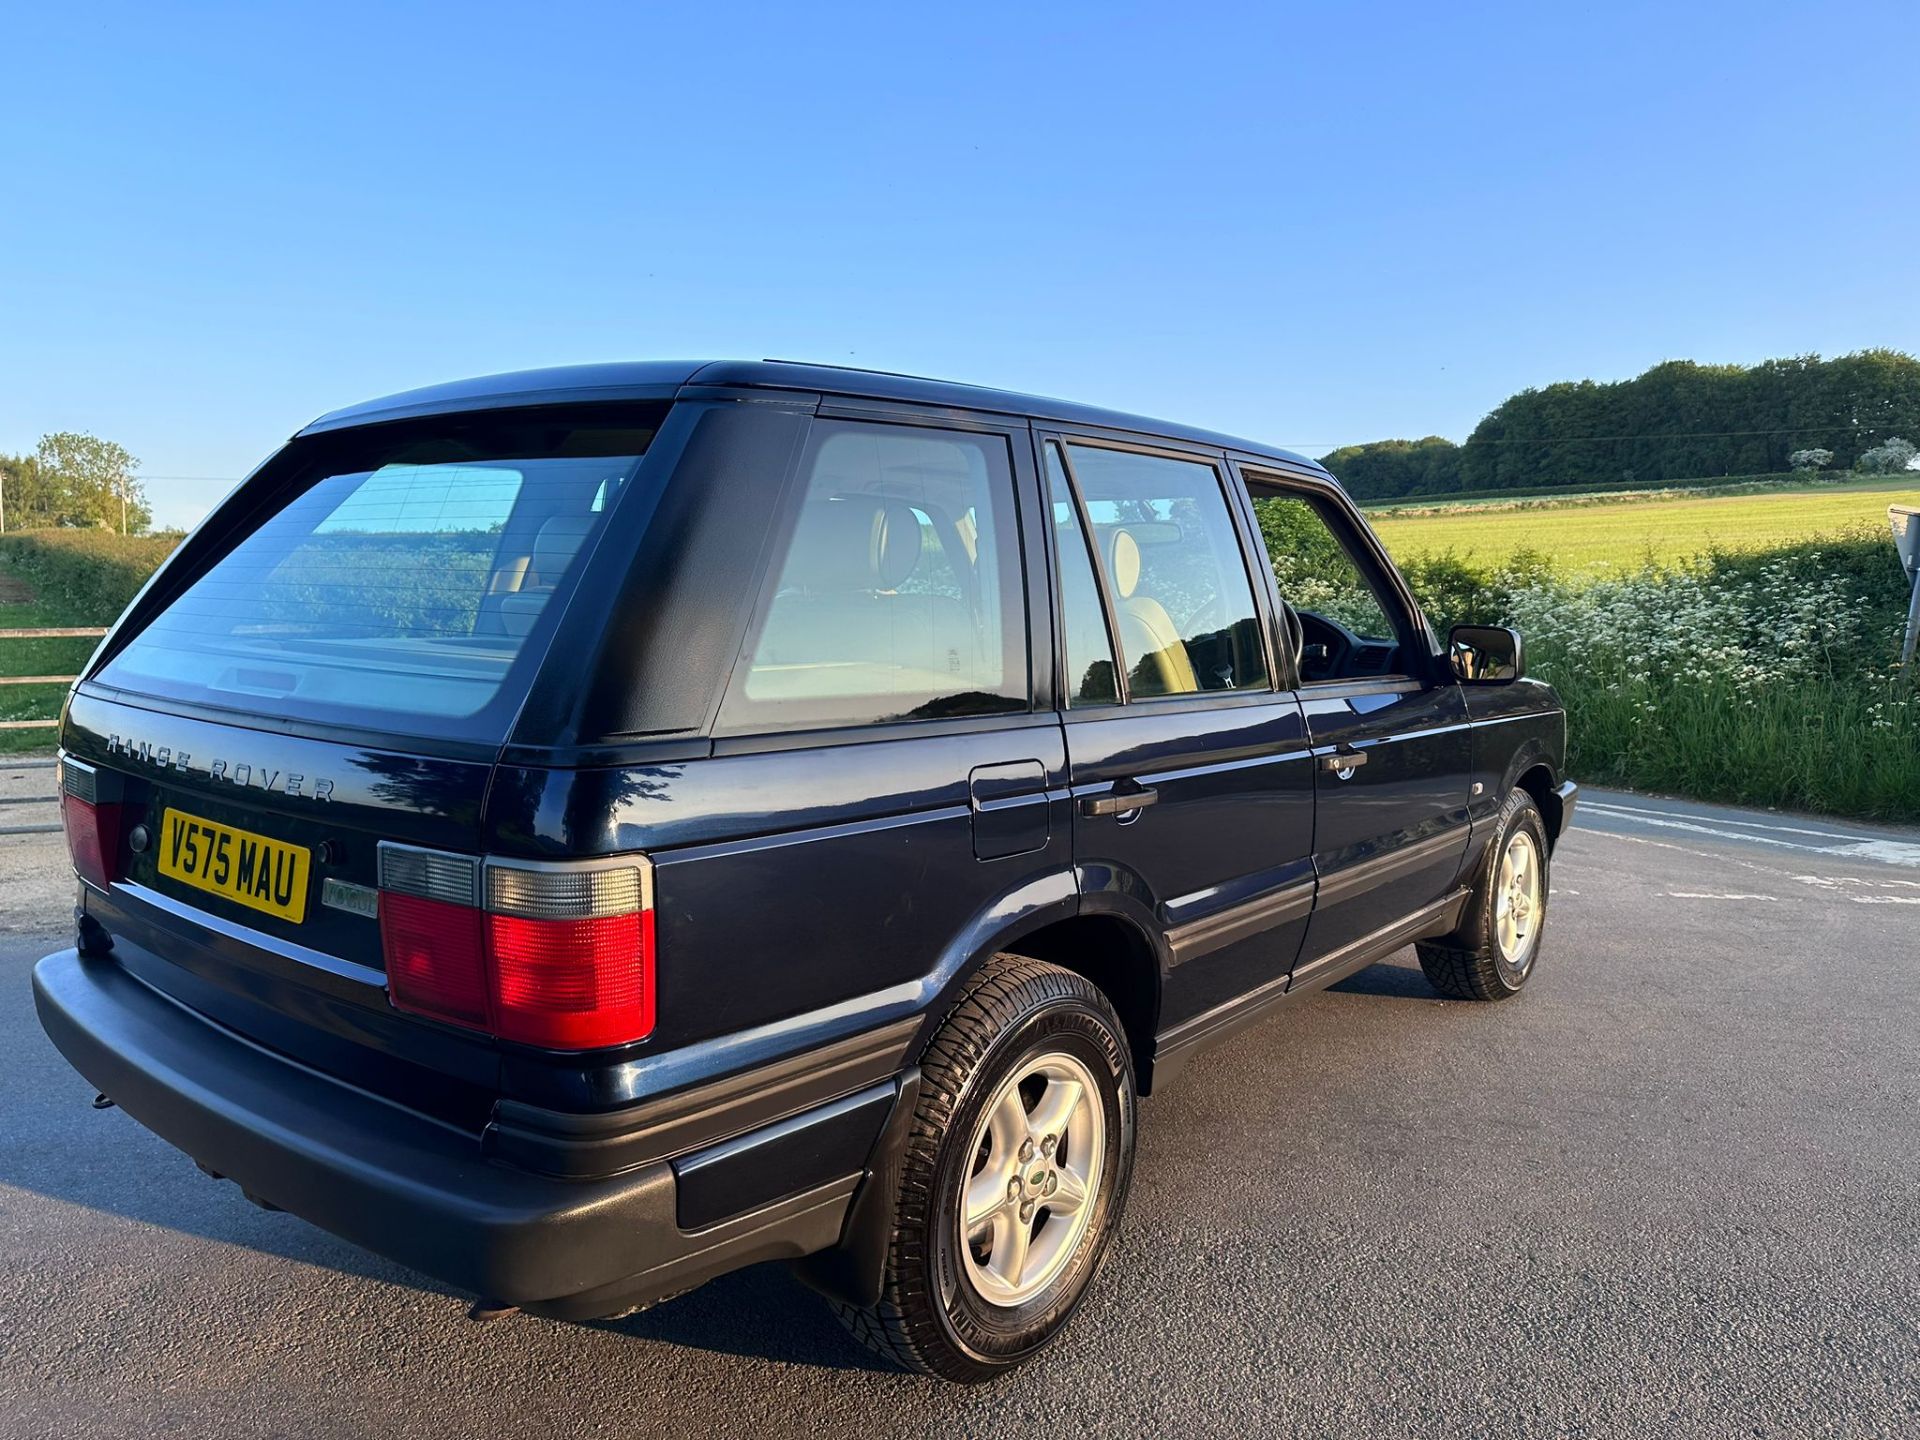 1999 RANGE ROVER VOGUE 4.6 V8 P38 (THOR ENGINE) - 59K MILES FROM NEW - Image 6 of 13